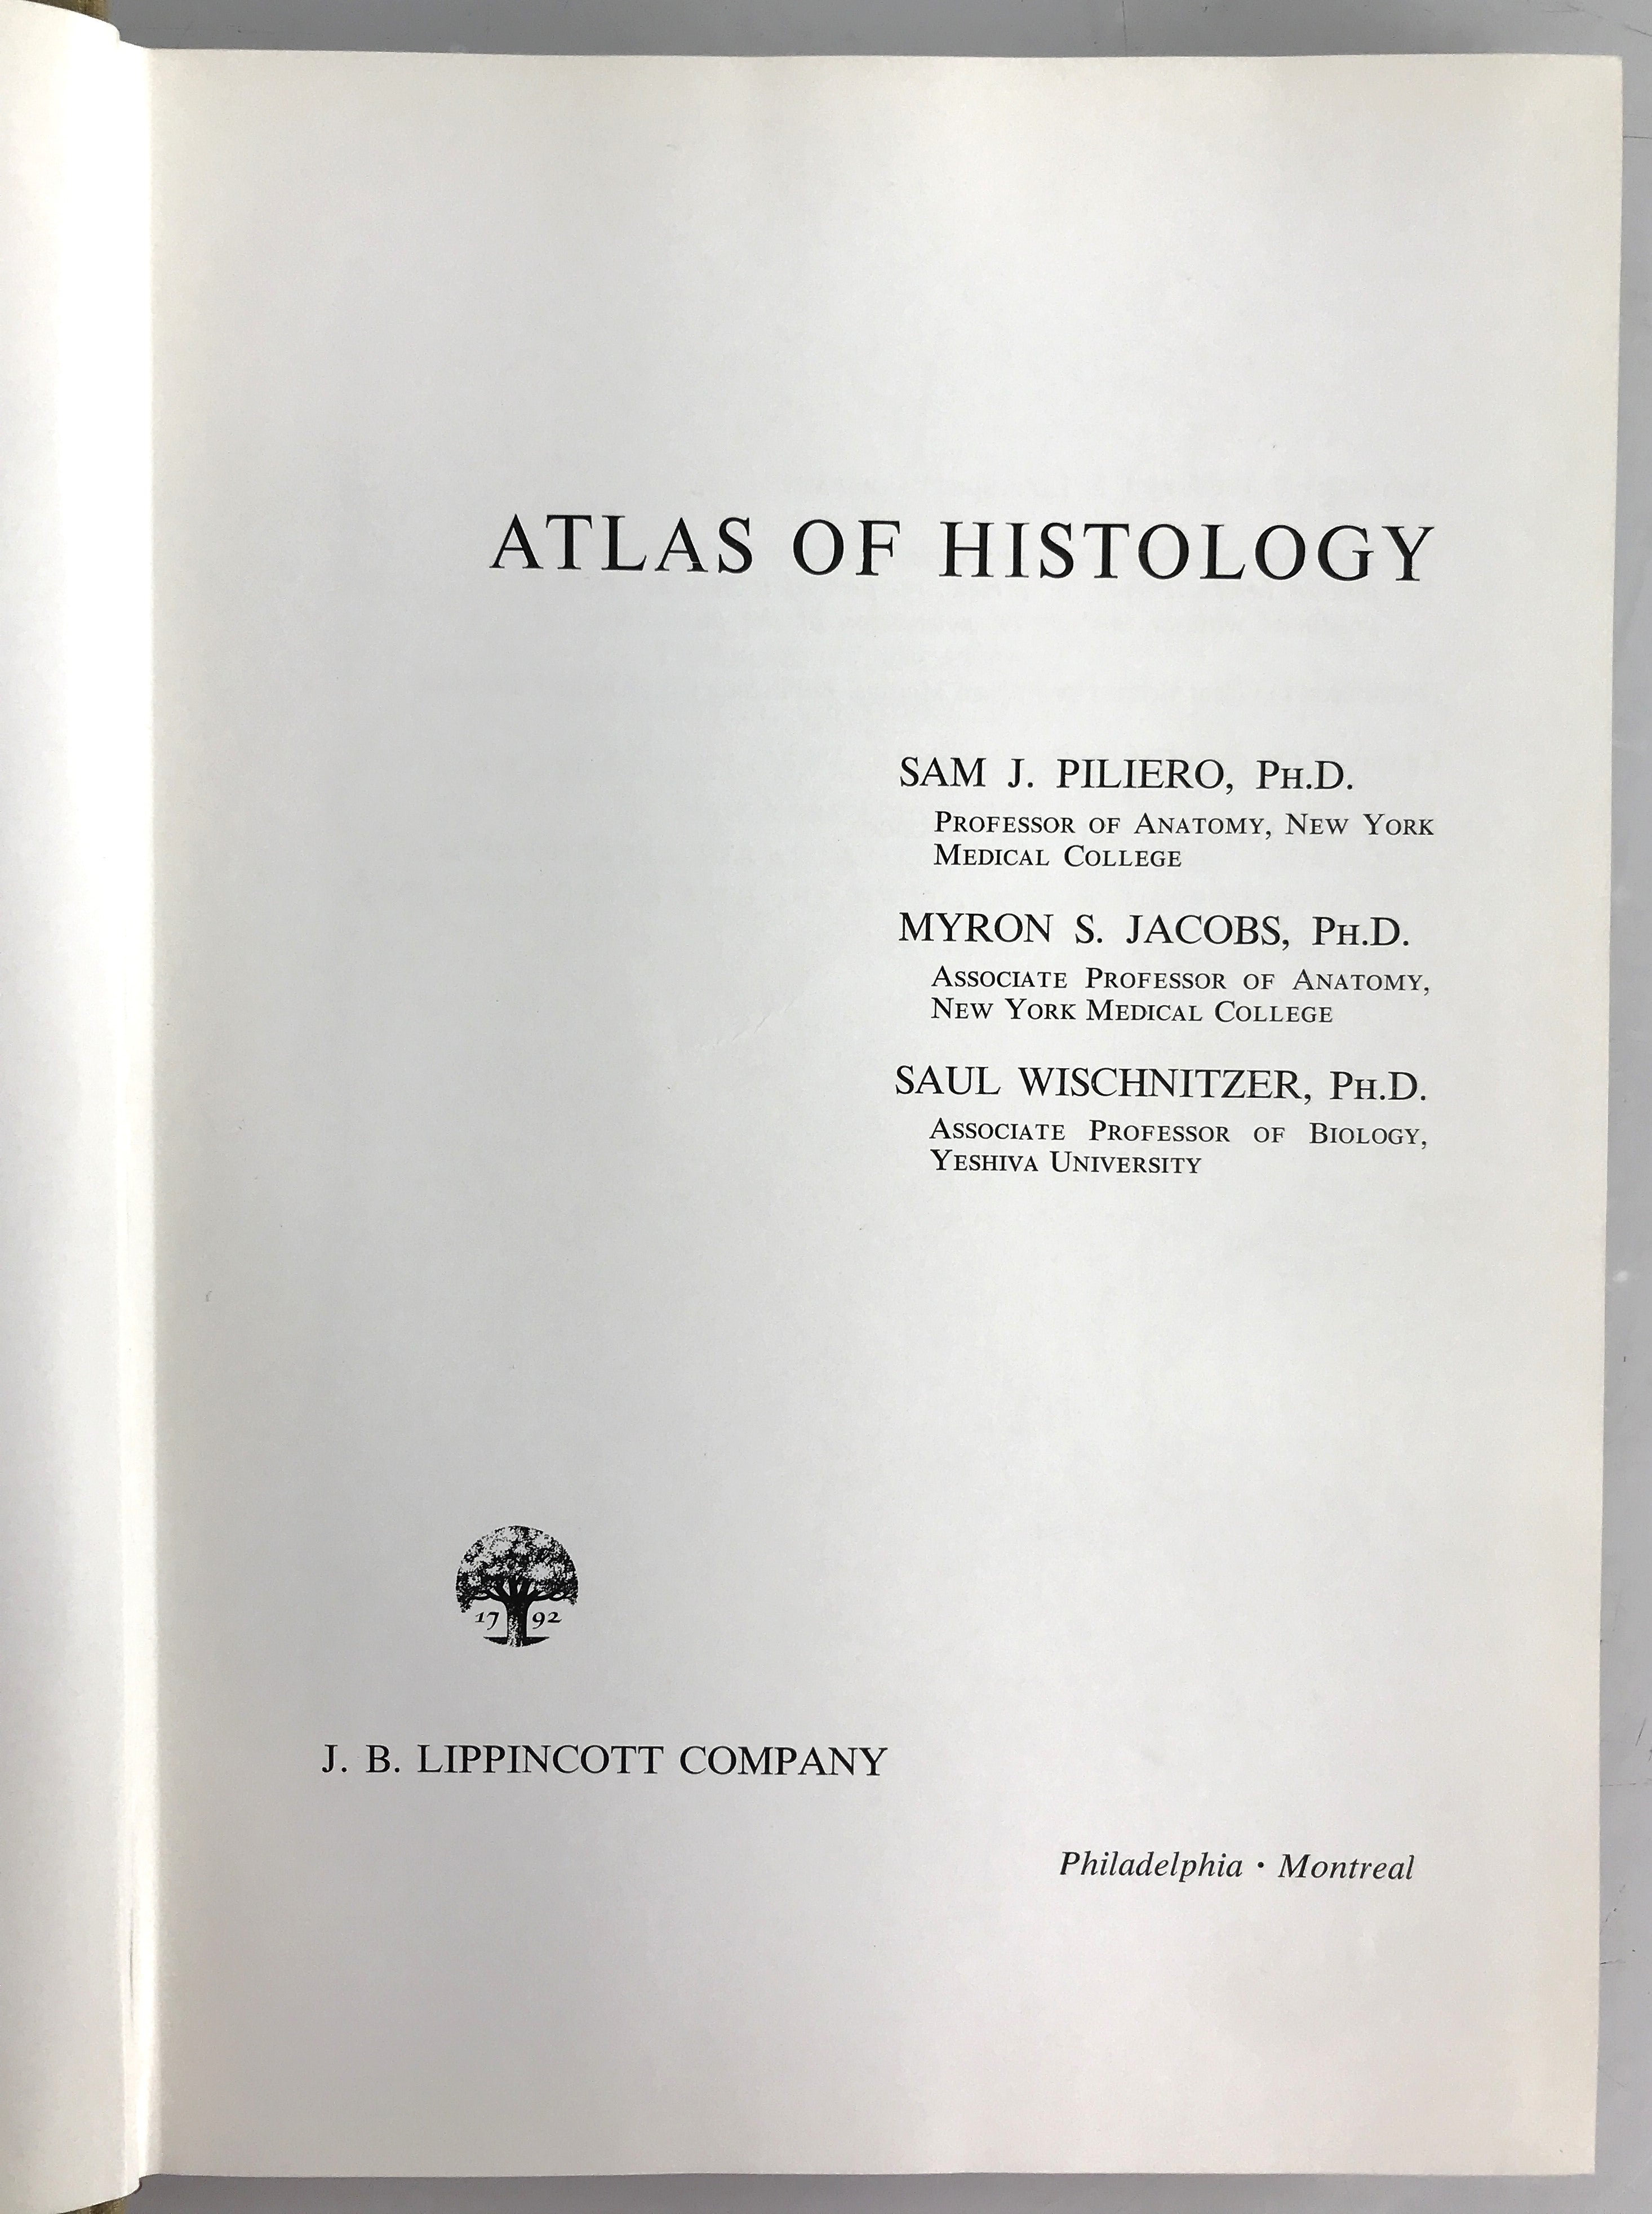 Atlas of Histology by Piliero, Jacobs, and Wischnitzer 1965 HC